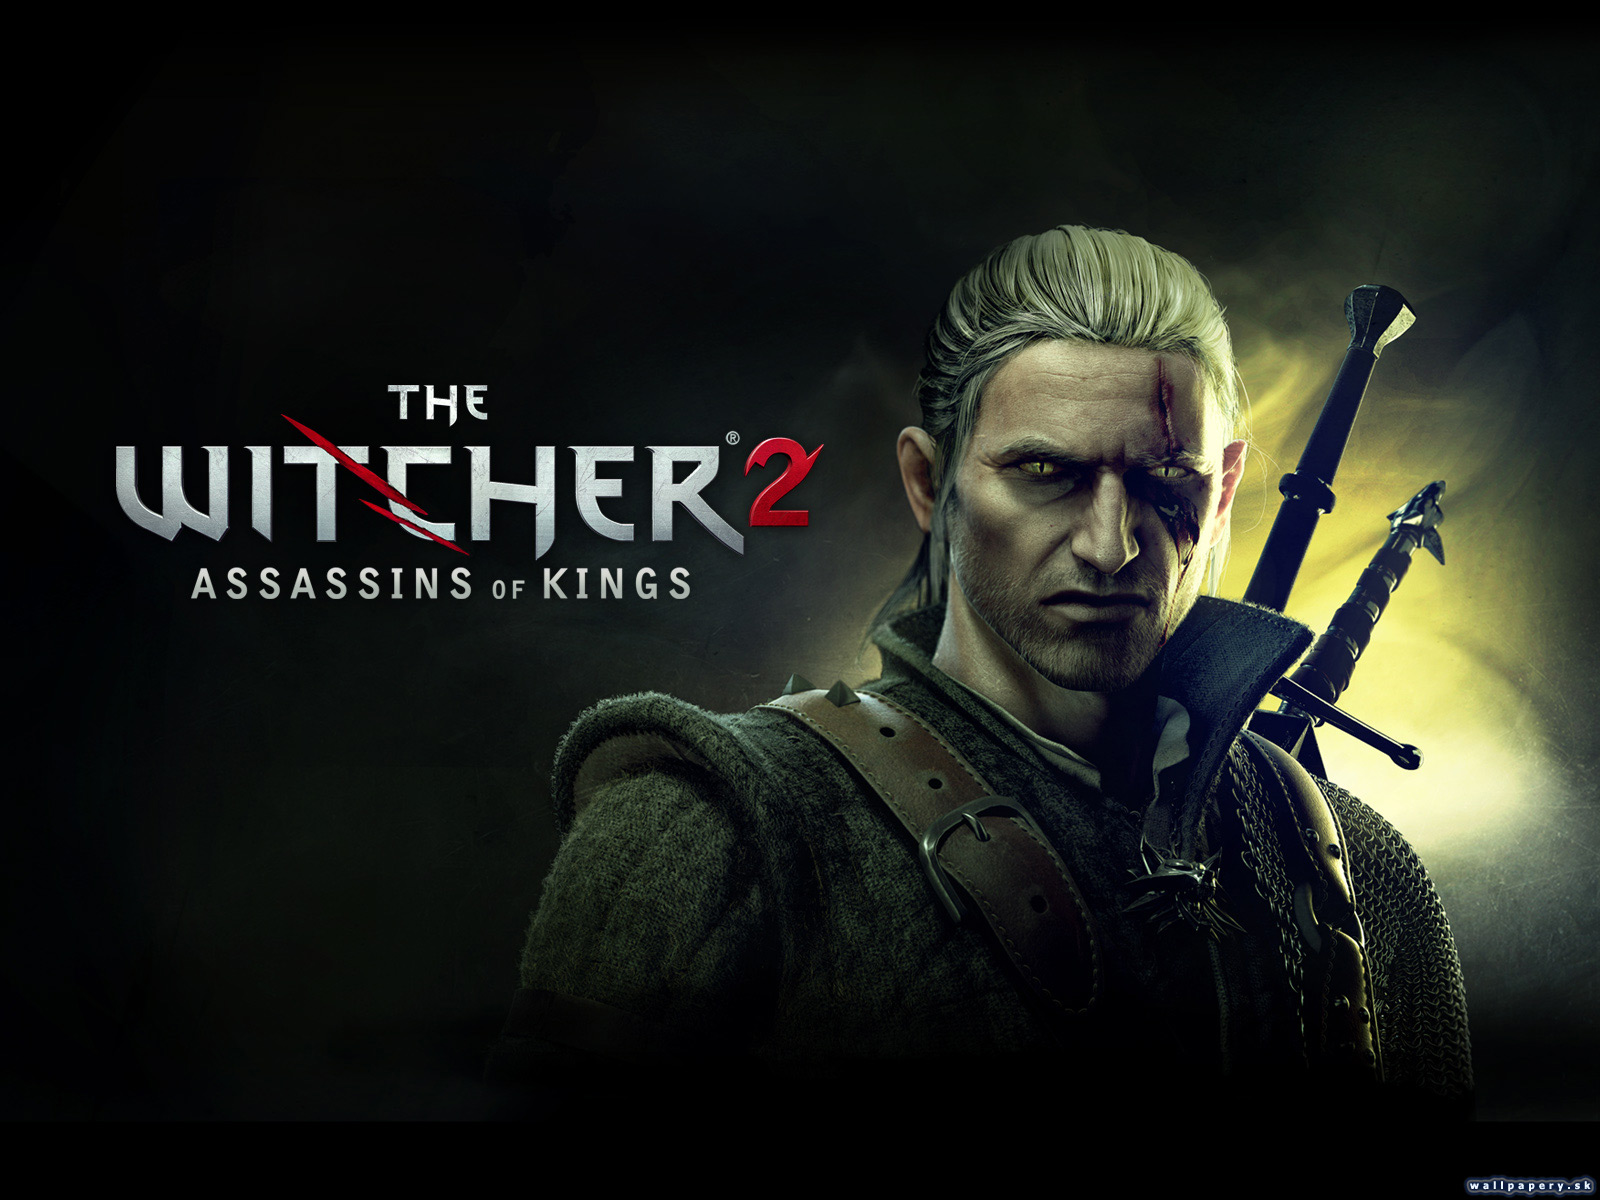 The Witcher 2: Assassins of Kings - wallpaper 1